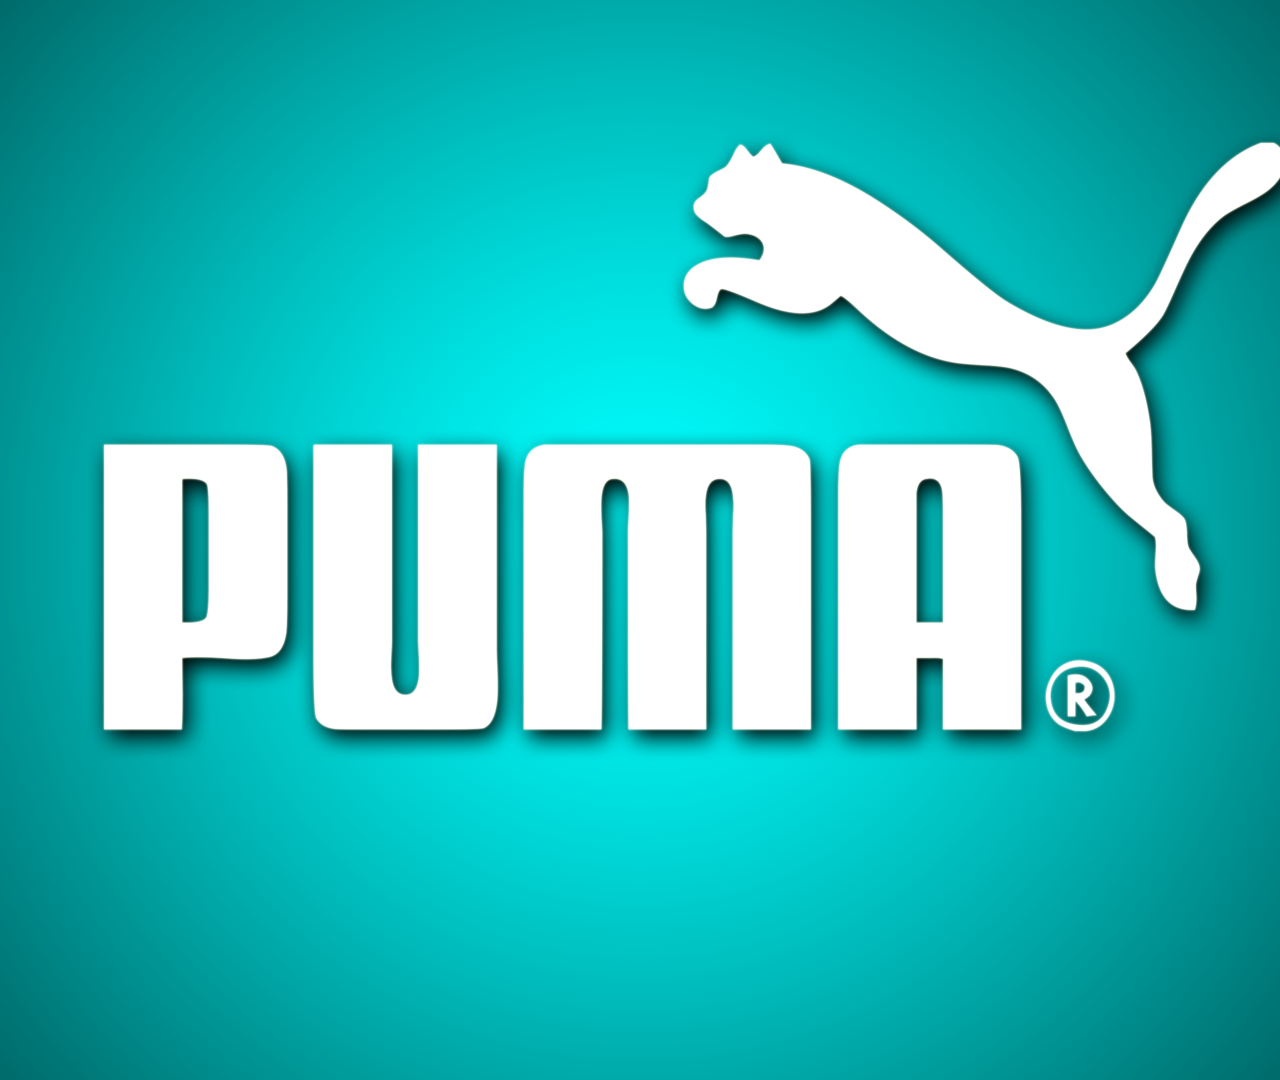 where is puma brand from